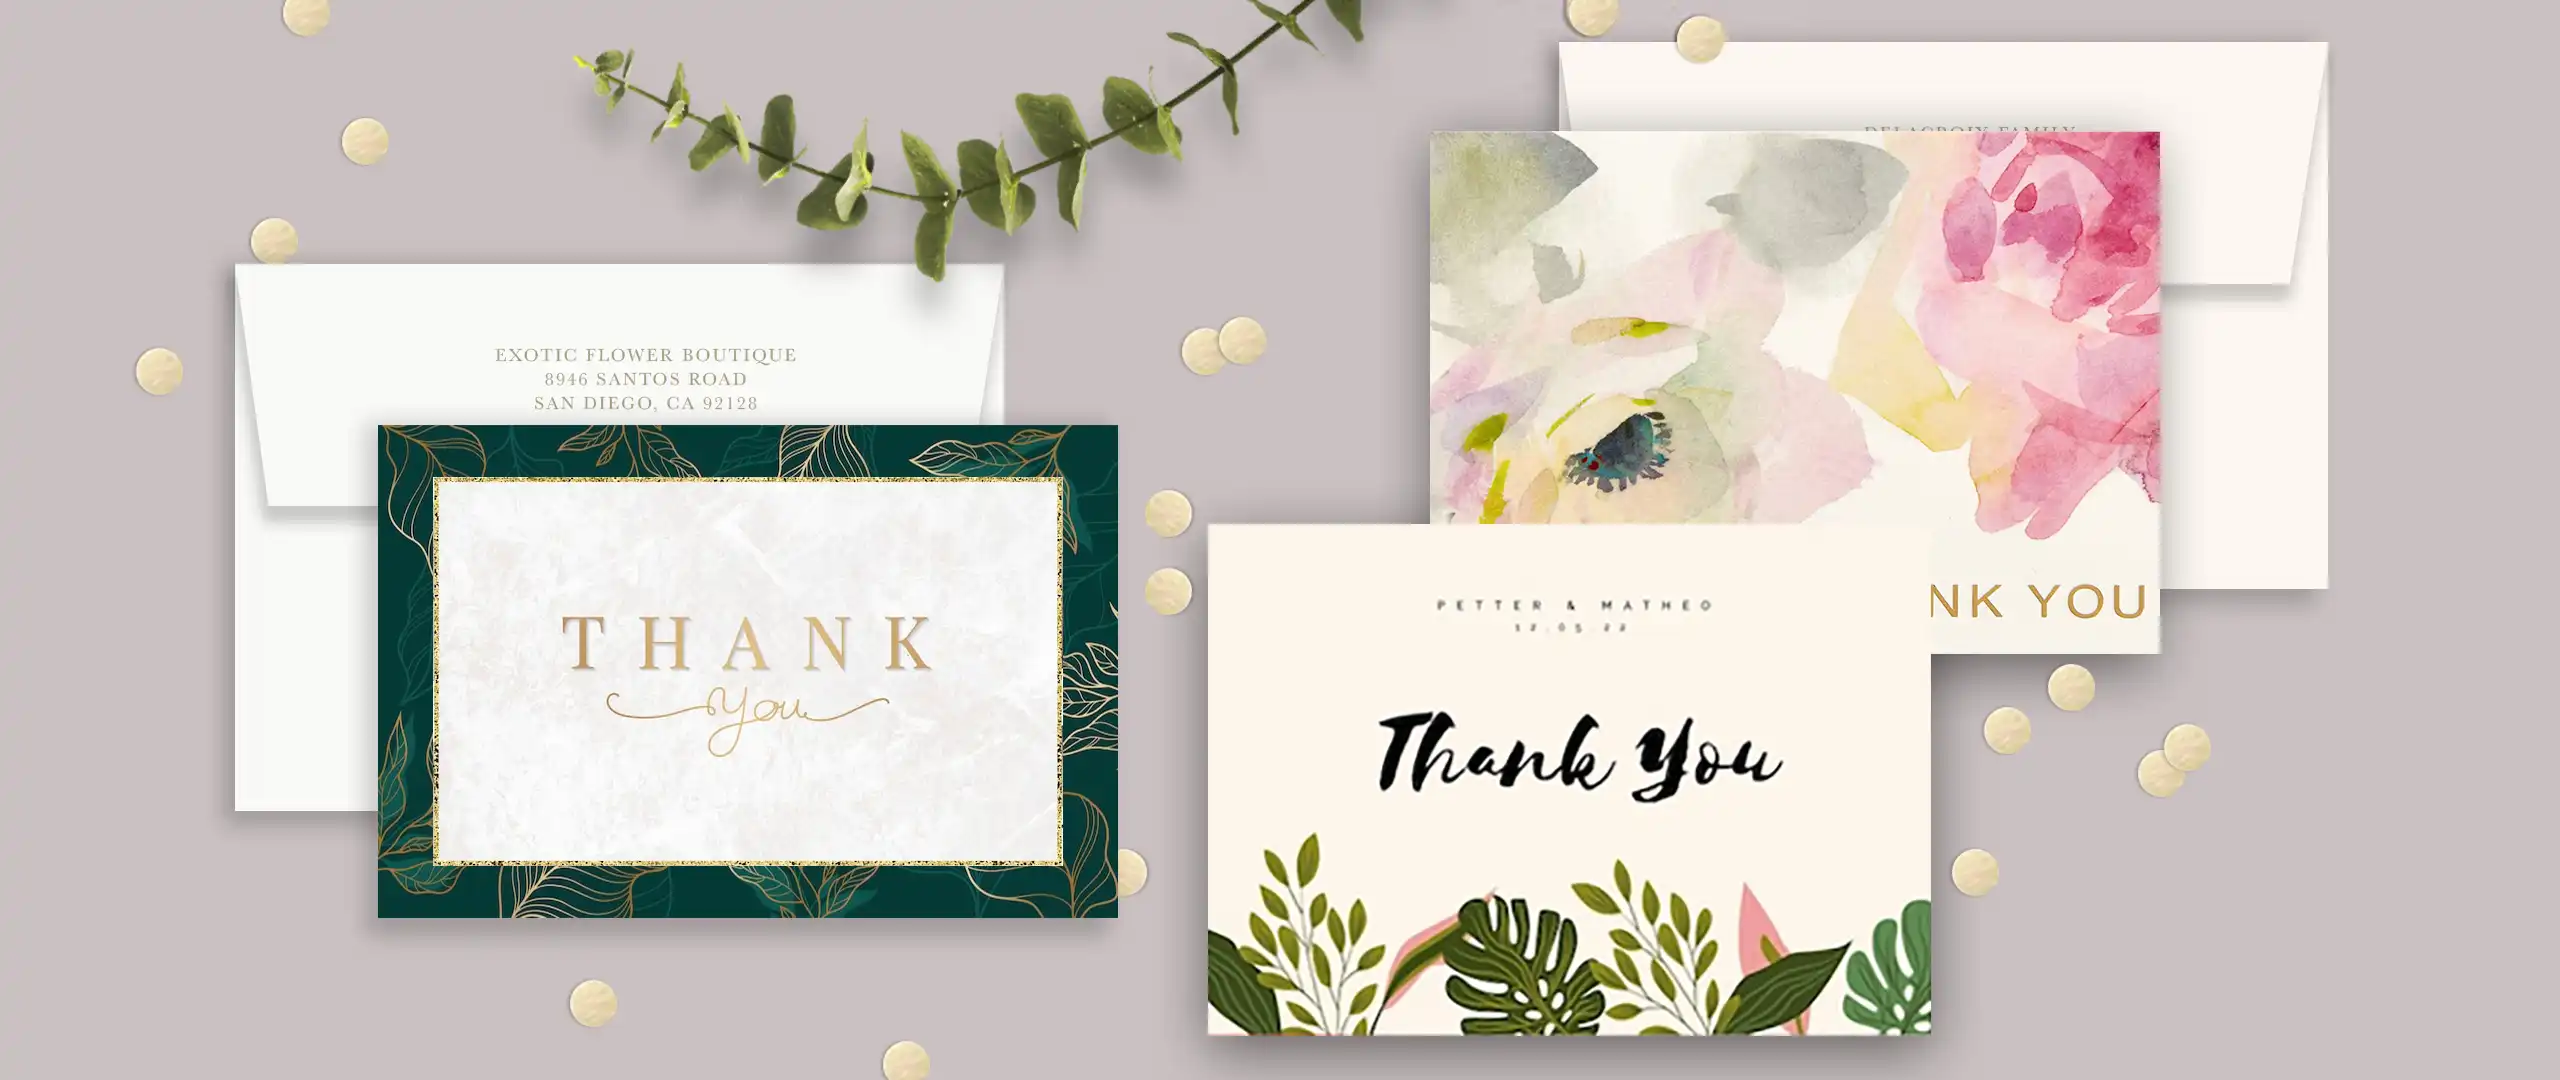 Using Thank You Cards For Business | Vizons Design